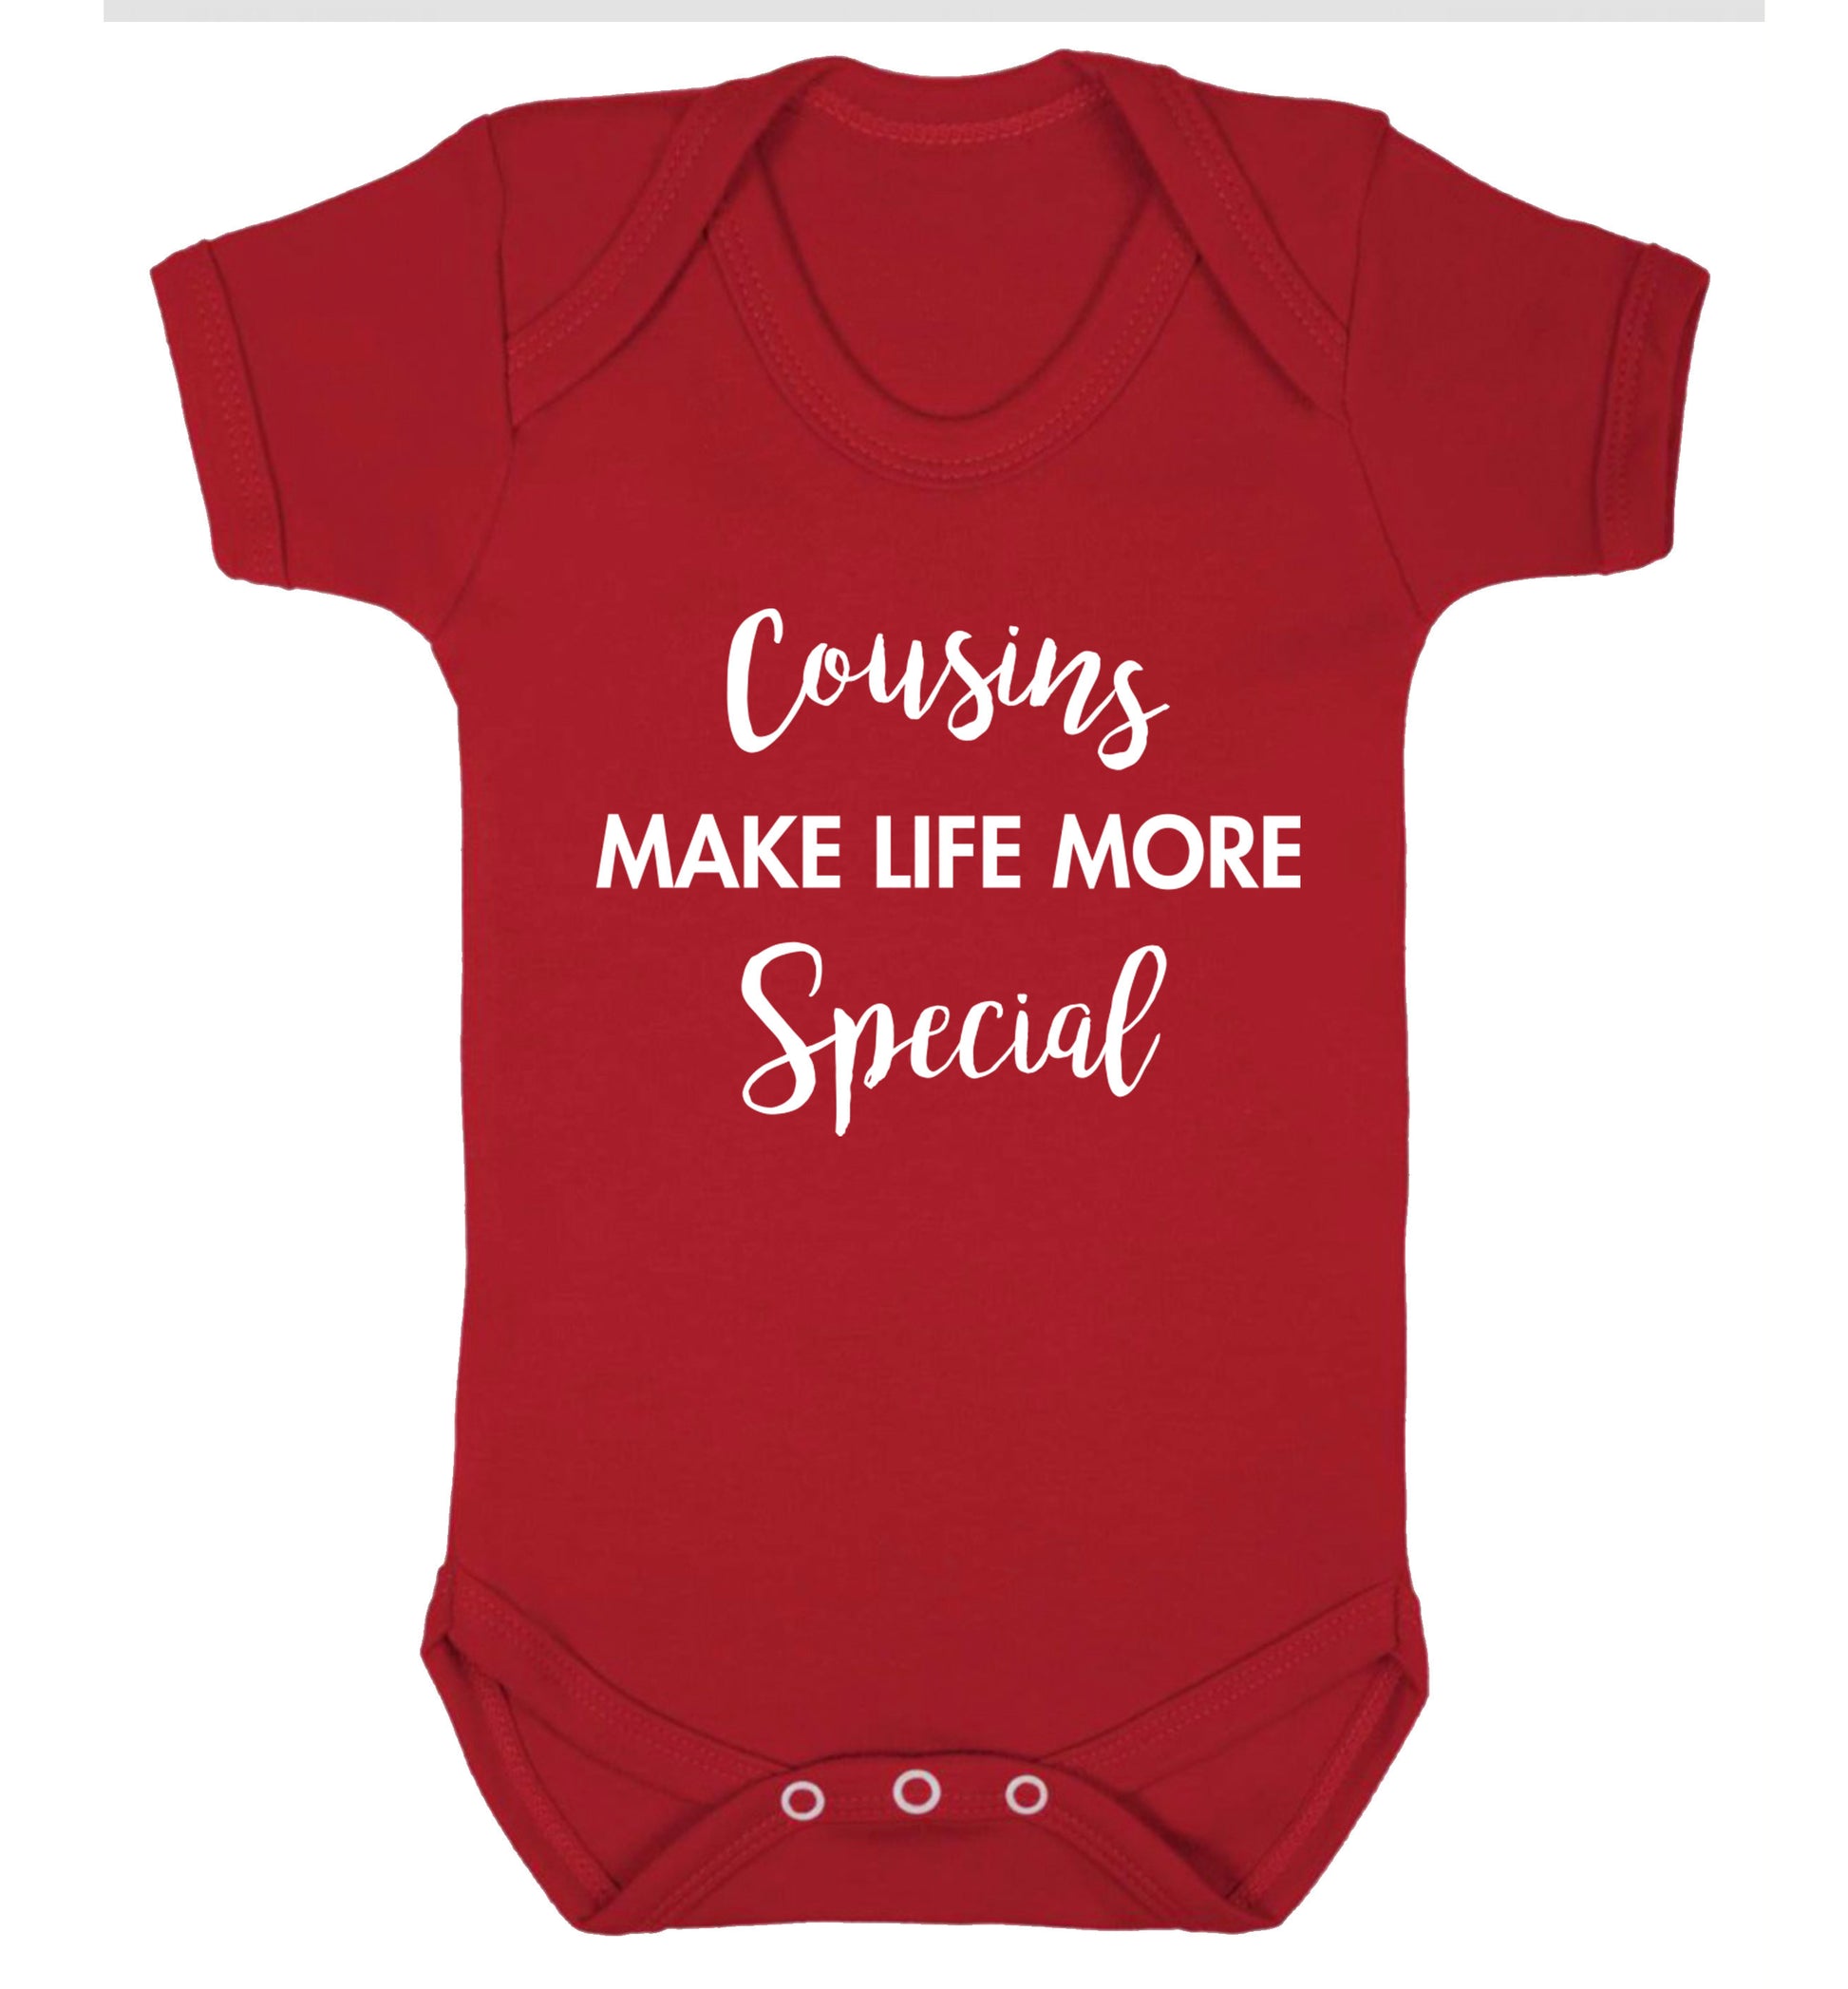 Cousins make life more special Baby Vest red 18-24 months